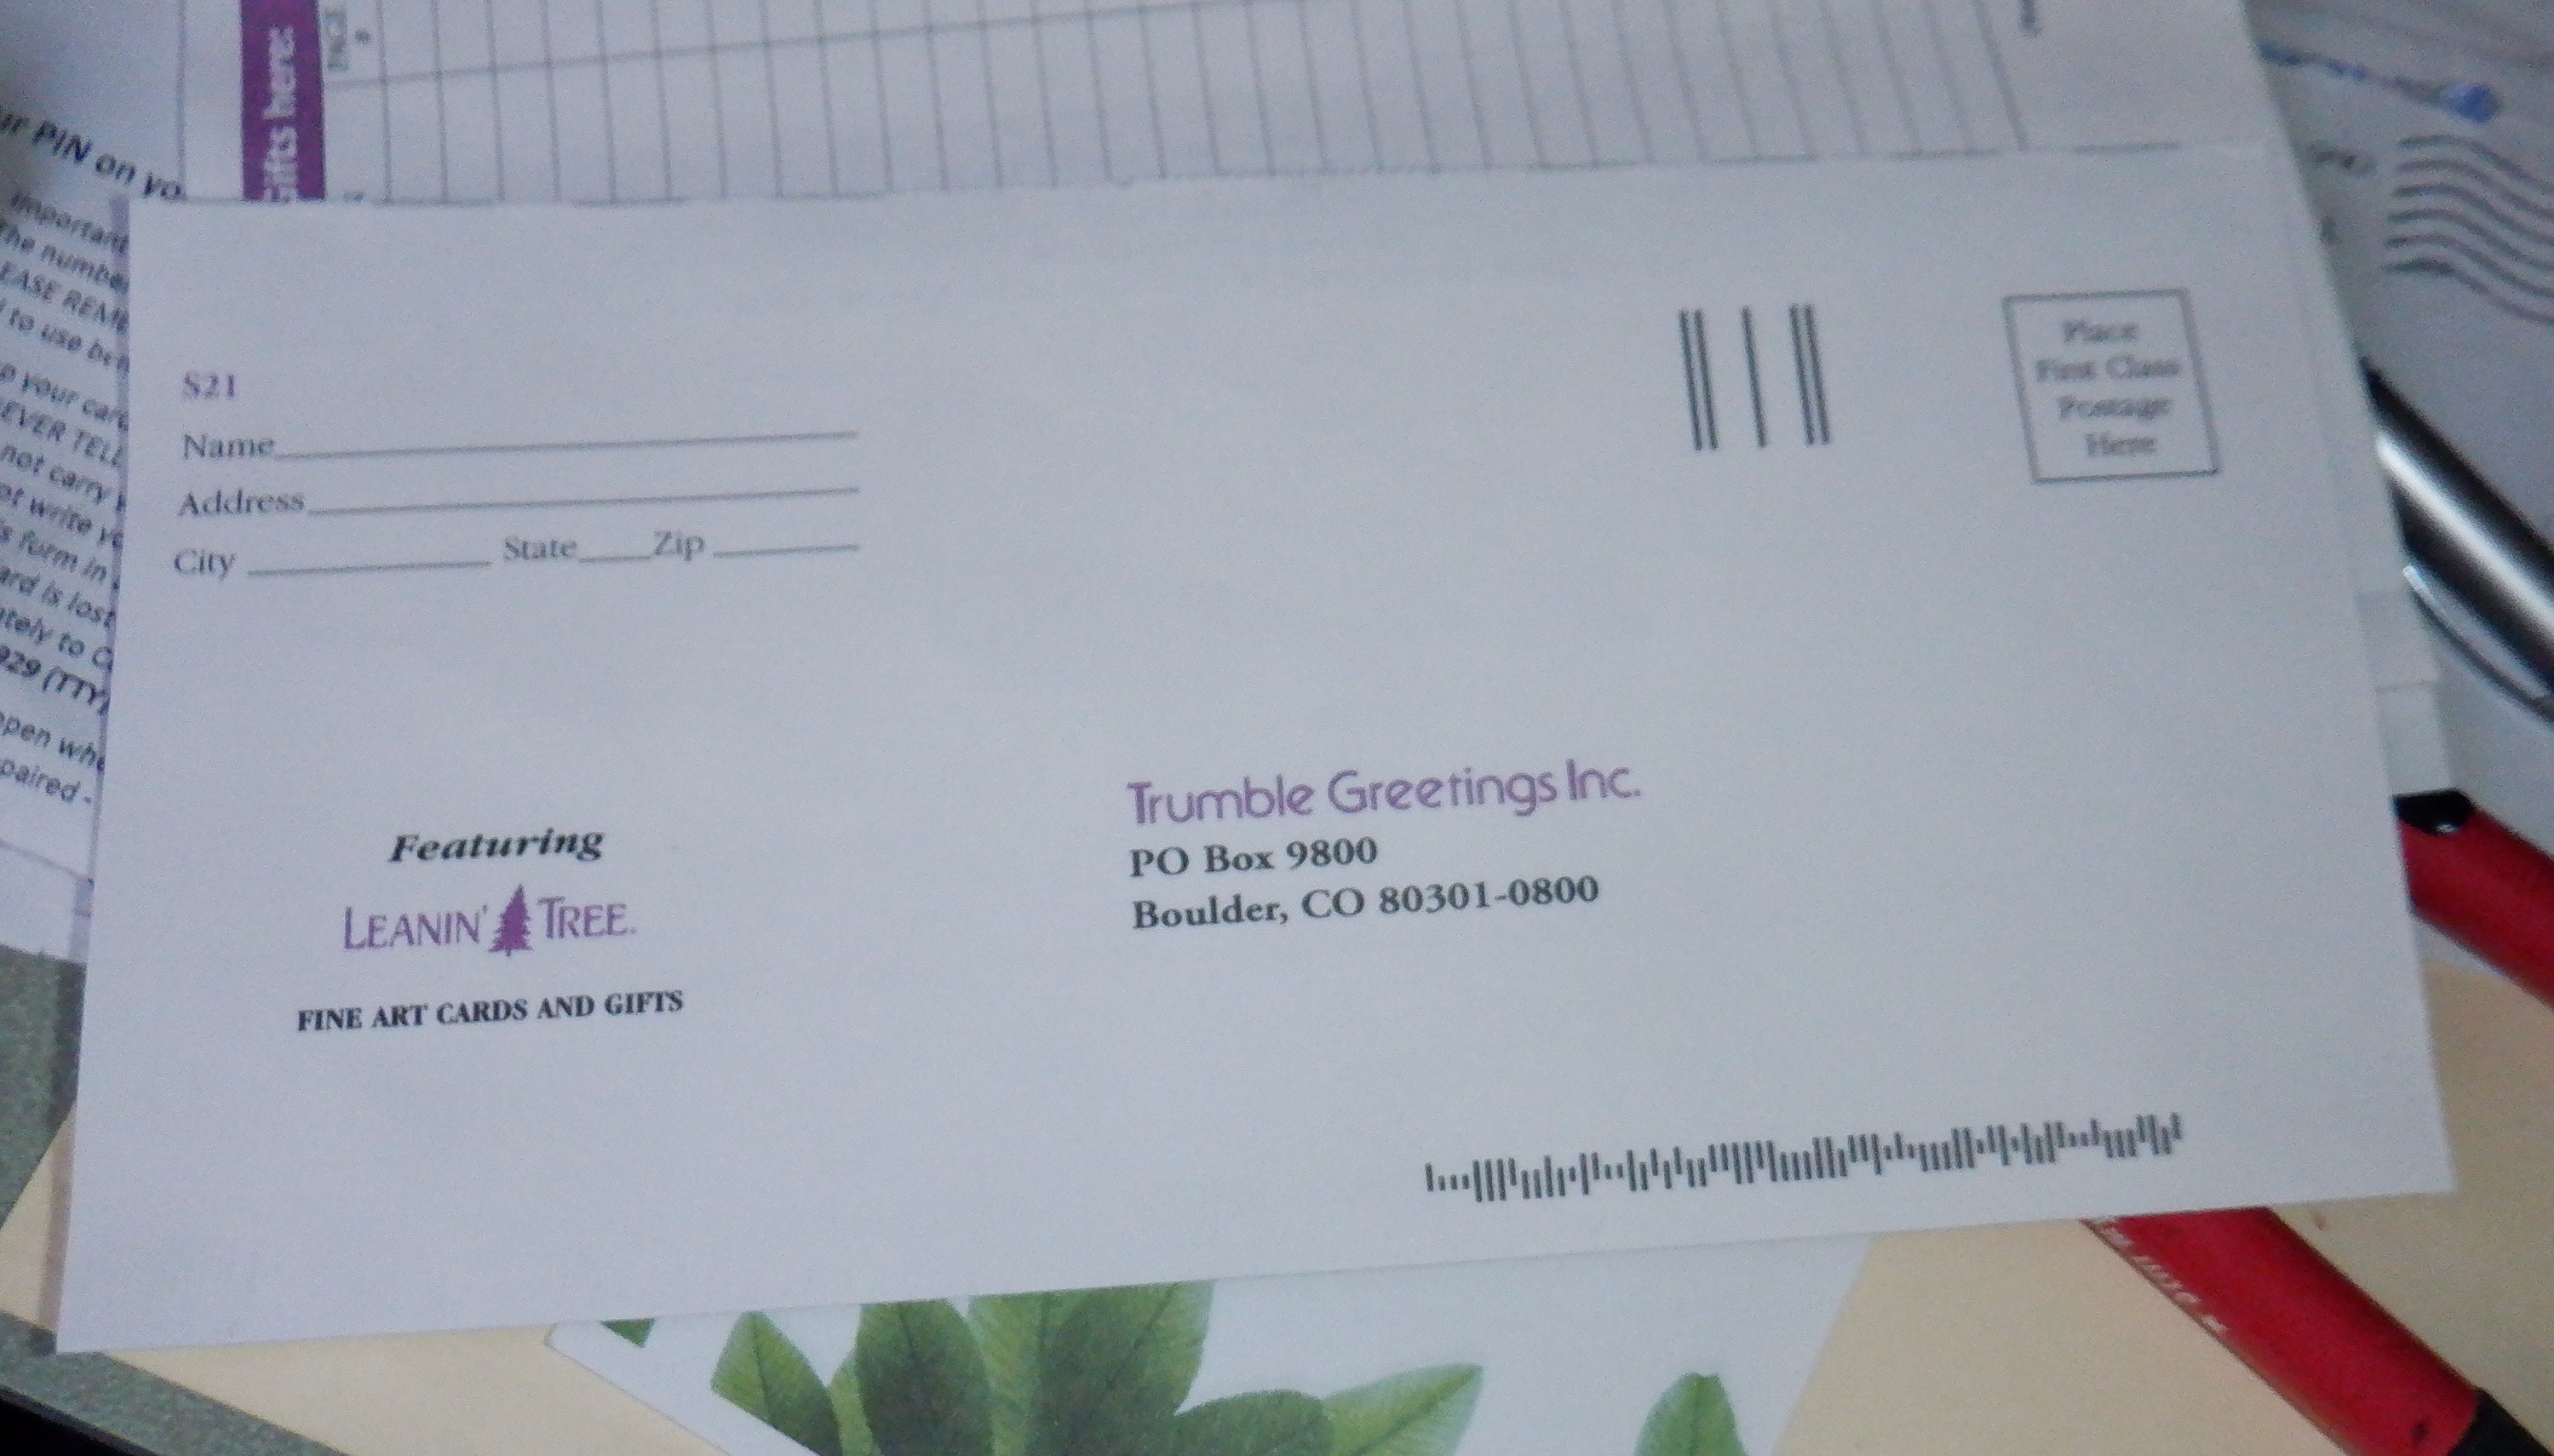 Photo I took of the envelope I used to order things to be sent to my new address